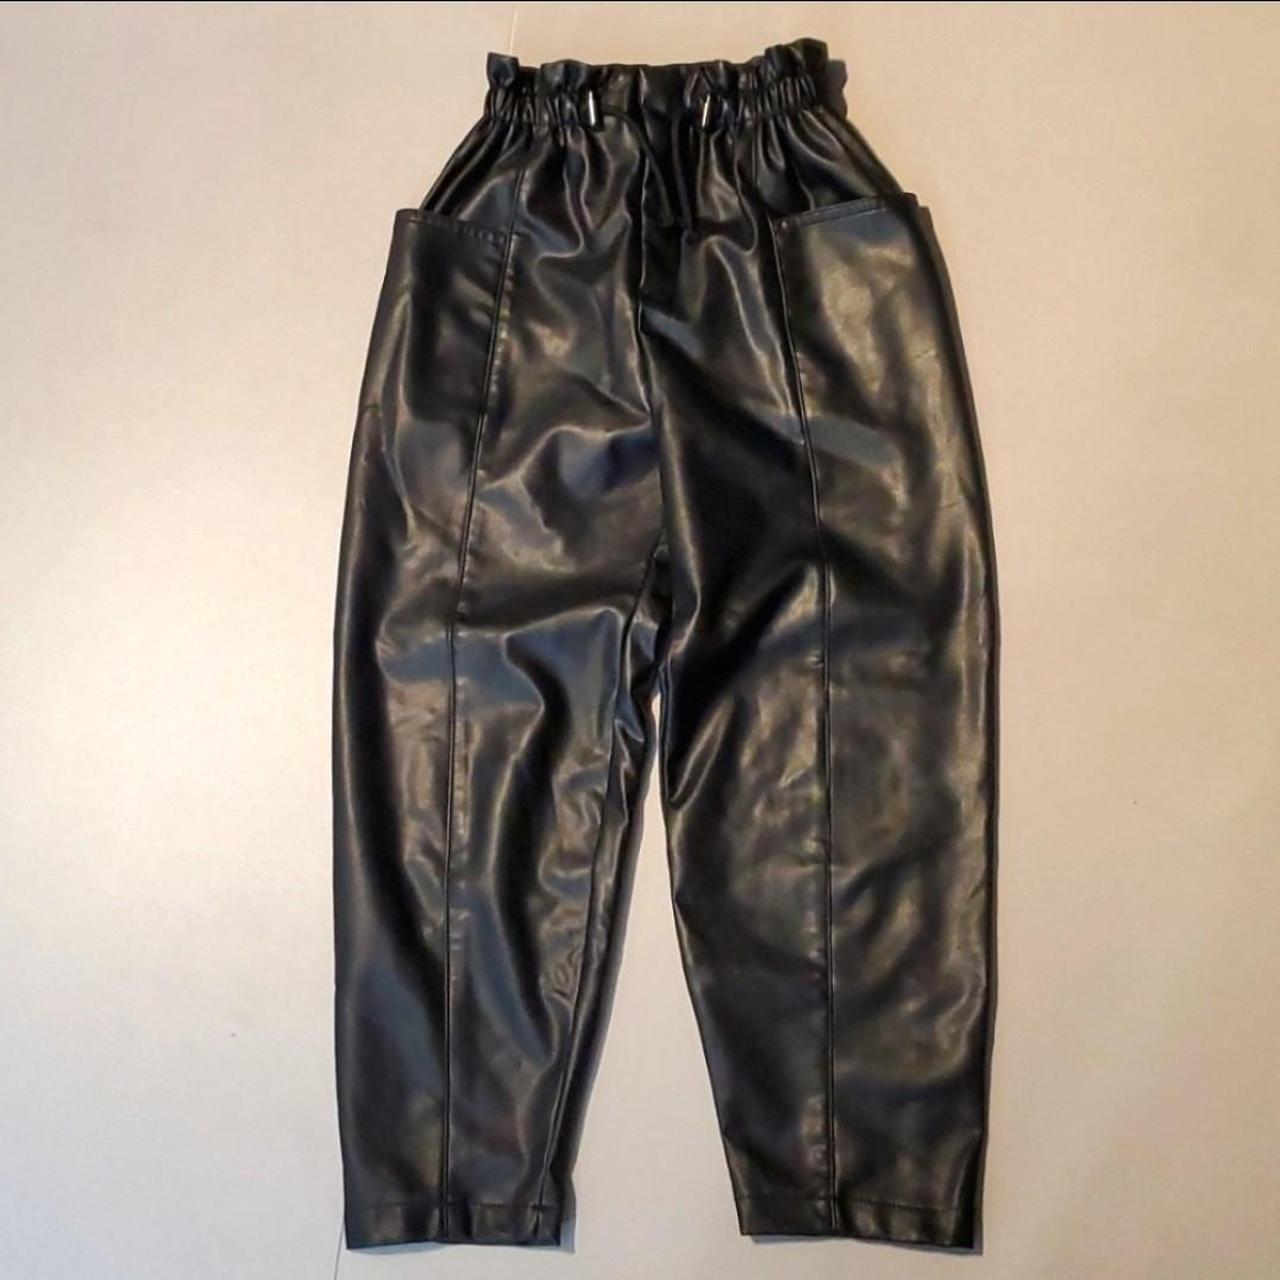 Faux leather pants from Zara. Size medium. The - Depop